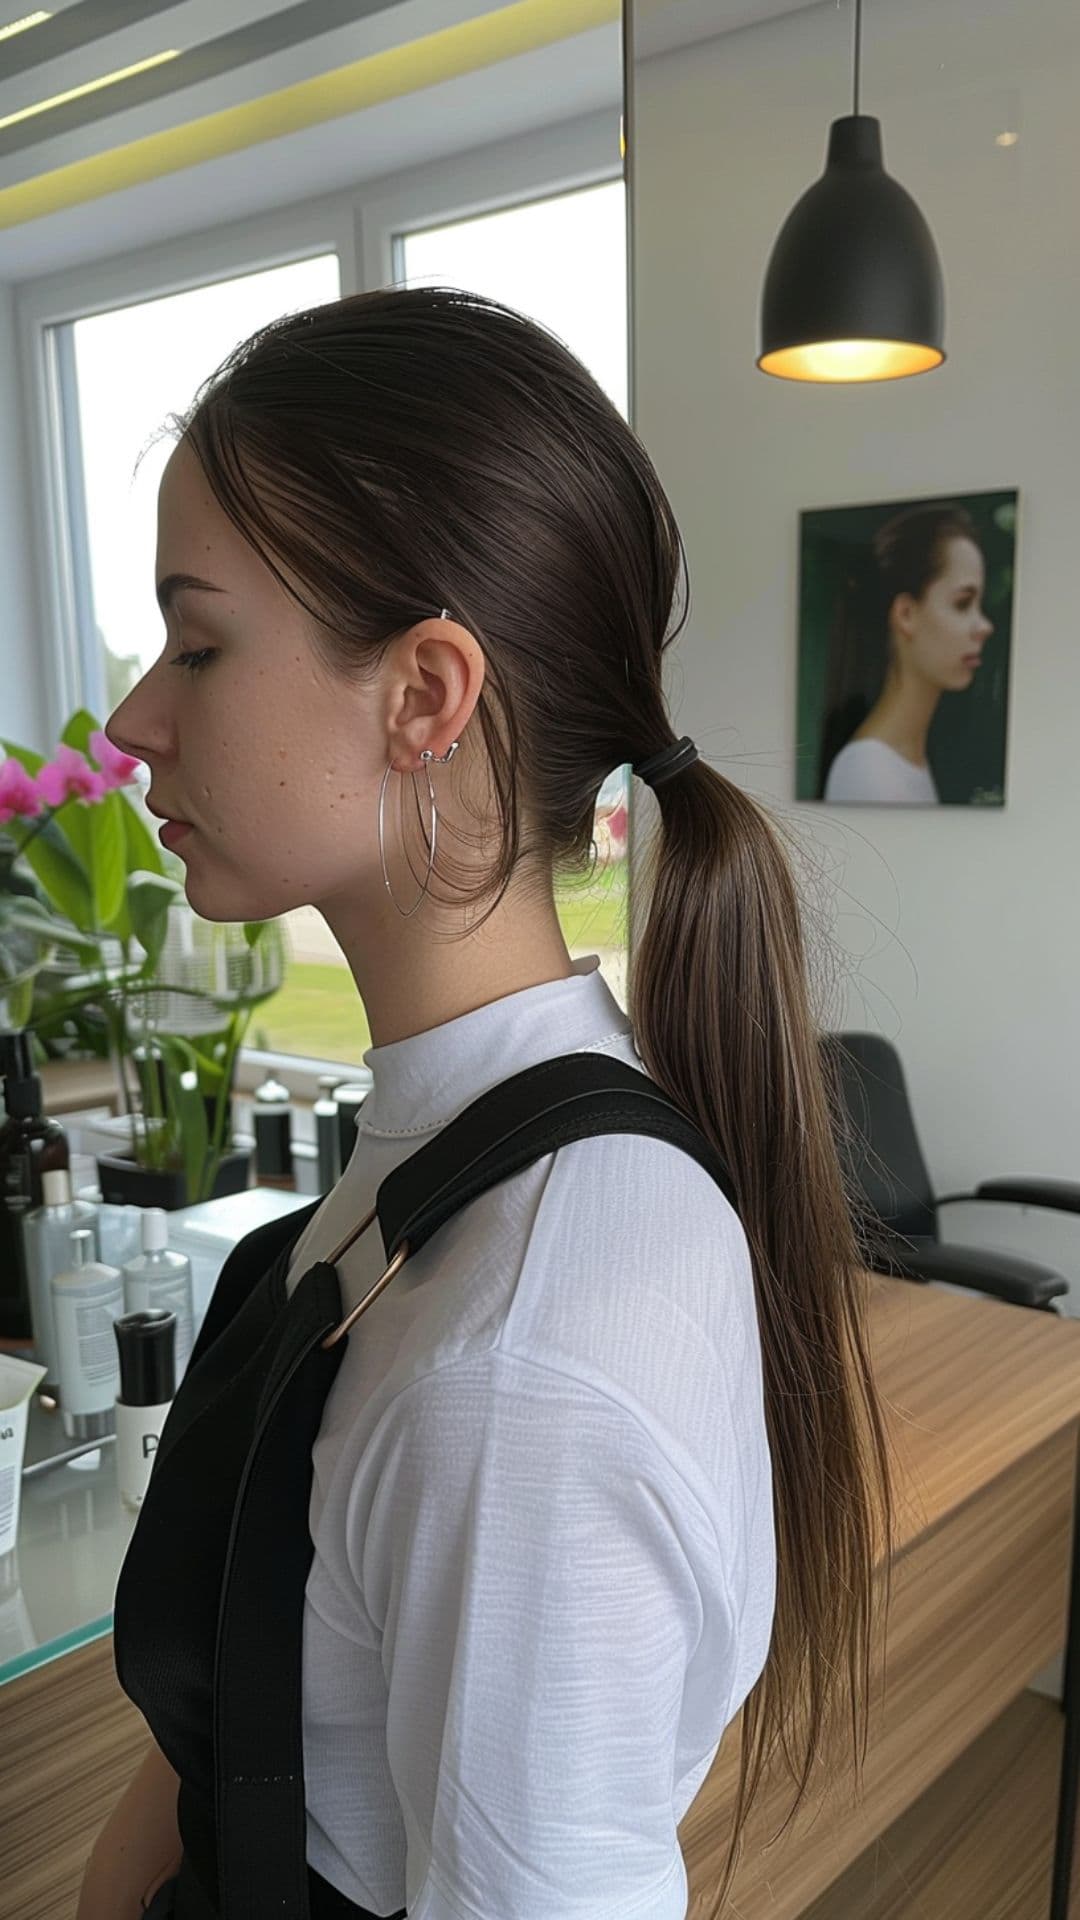 A round-faced woman modelling a sleek ponytail.